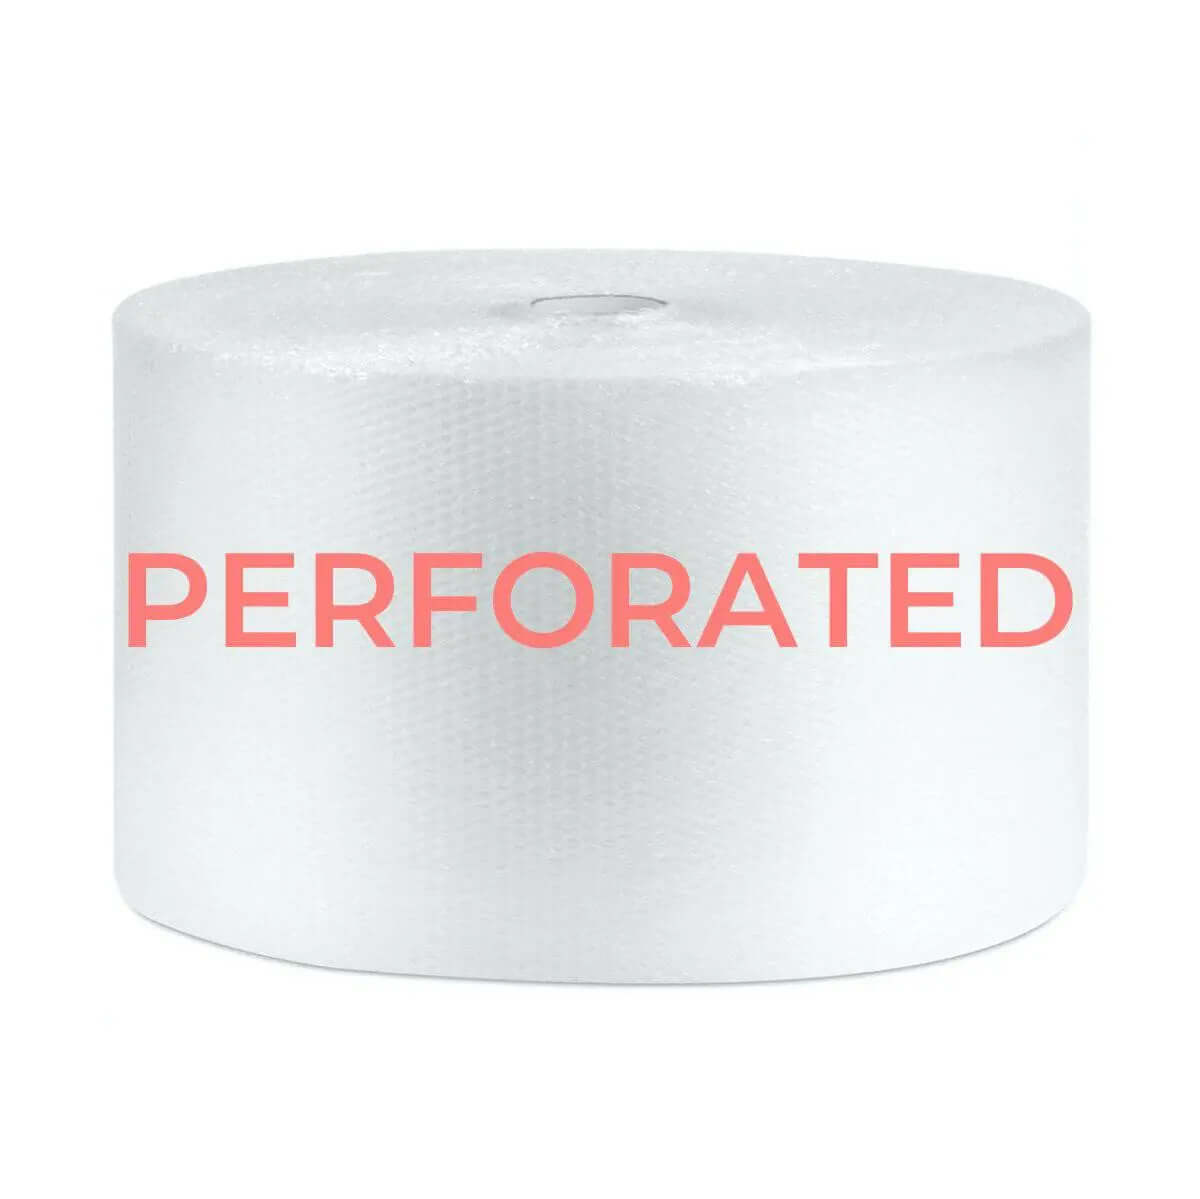 Perforated Bubble Wrap Roll - 375mm x 100m   Bubble Wrap Packstore Australia Packstore